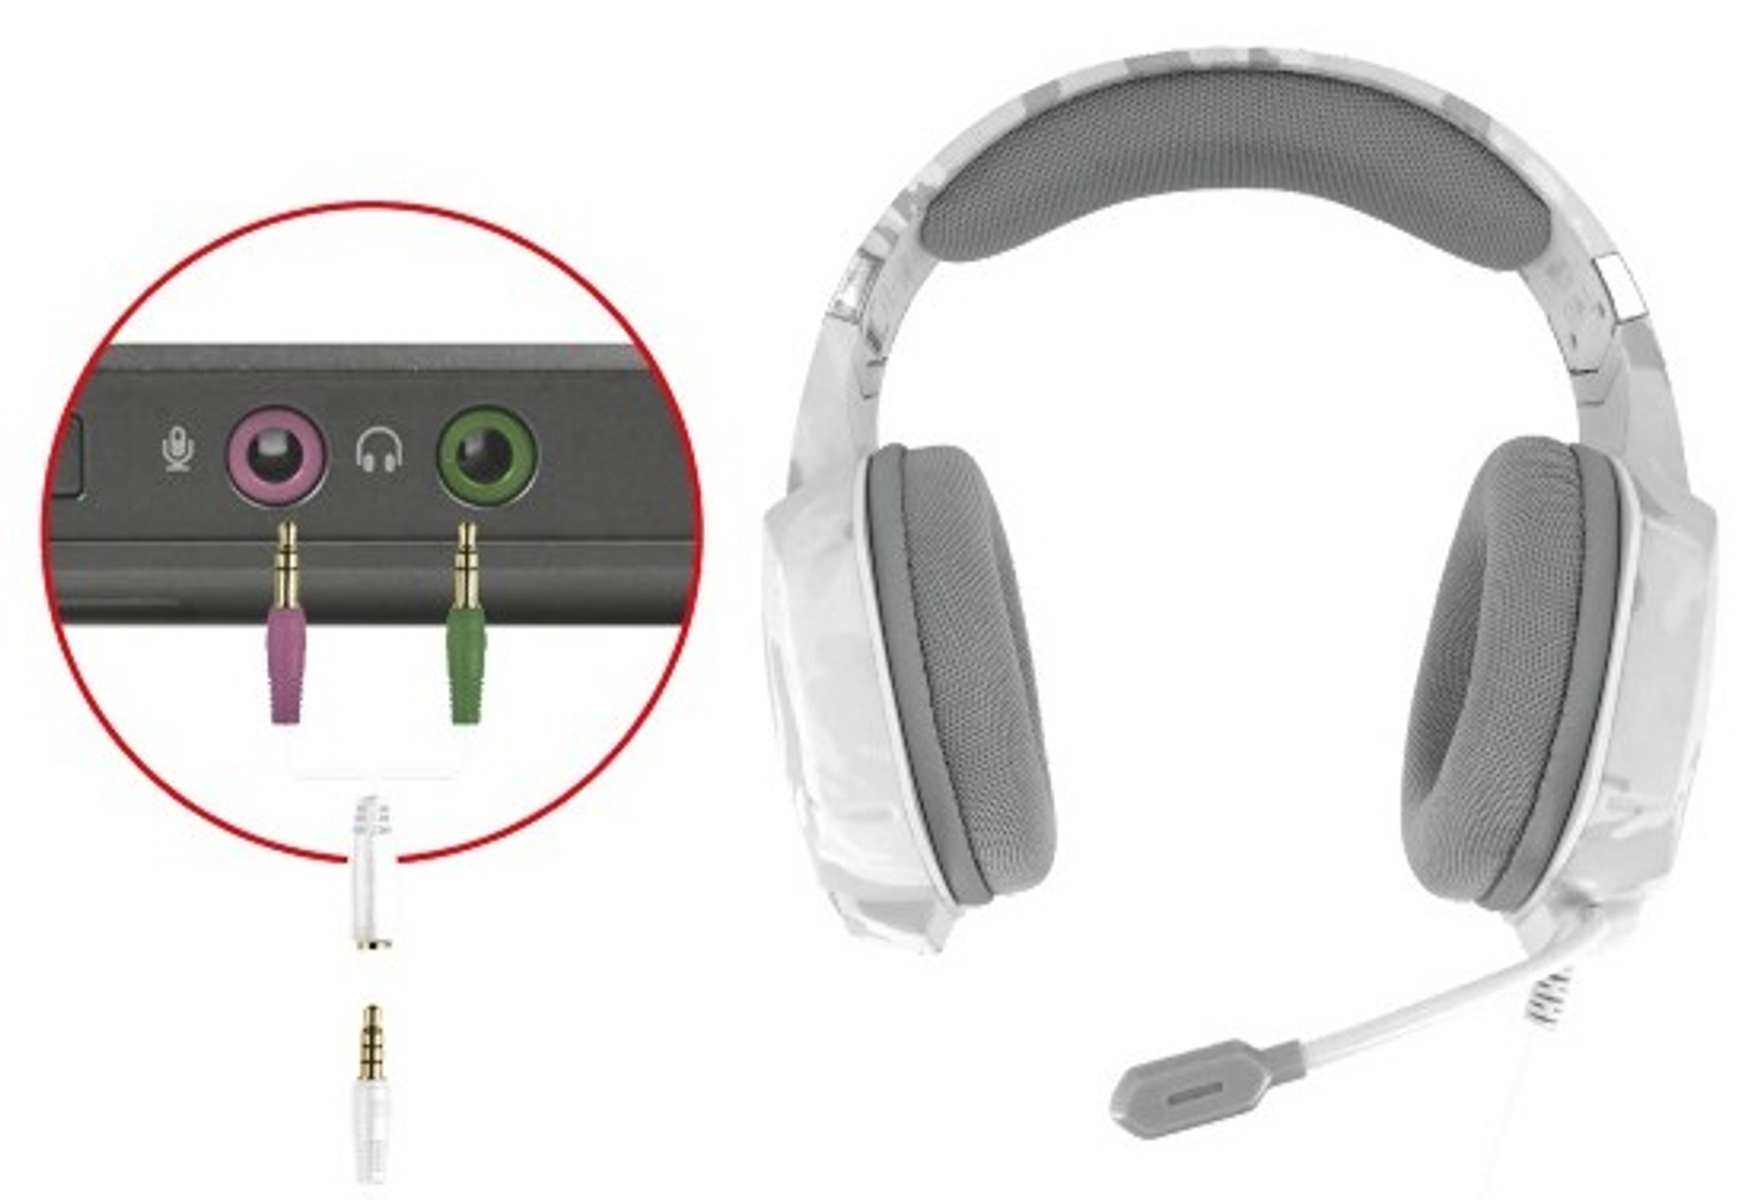 322W GXT 20864 GAMING Weiß/Camouflage CAMOUFLAGE, Gaming HEADSET TRUST Over-ear WHITE Headset